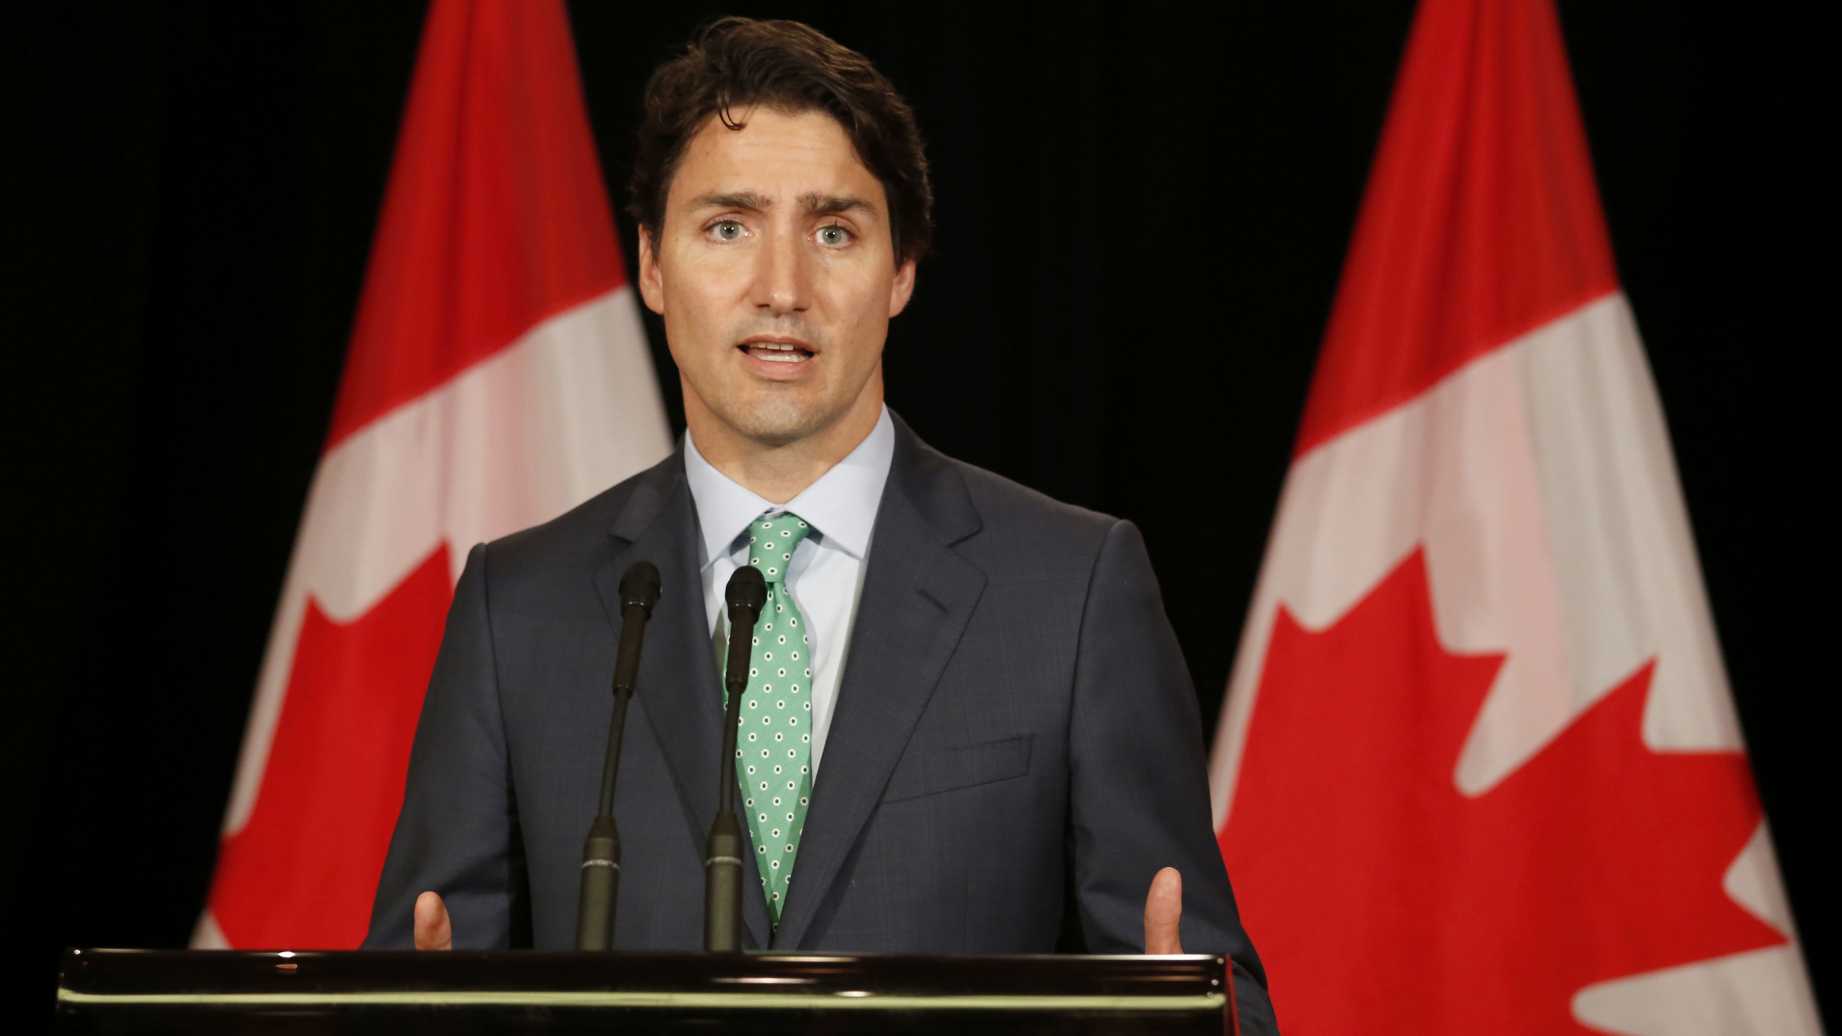 Canadian shooting victims what PM Trudeau to "do something" about guns (courtesy dailywire.com and AP)